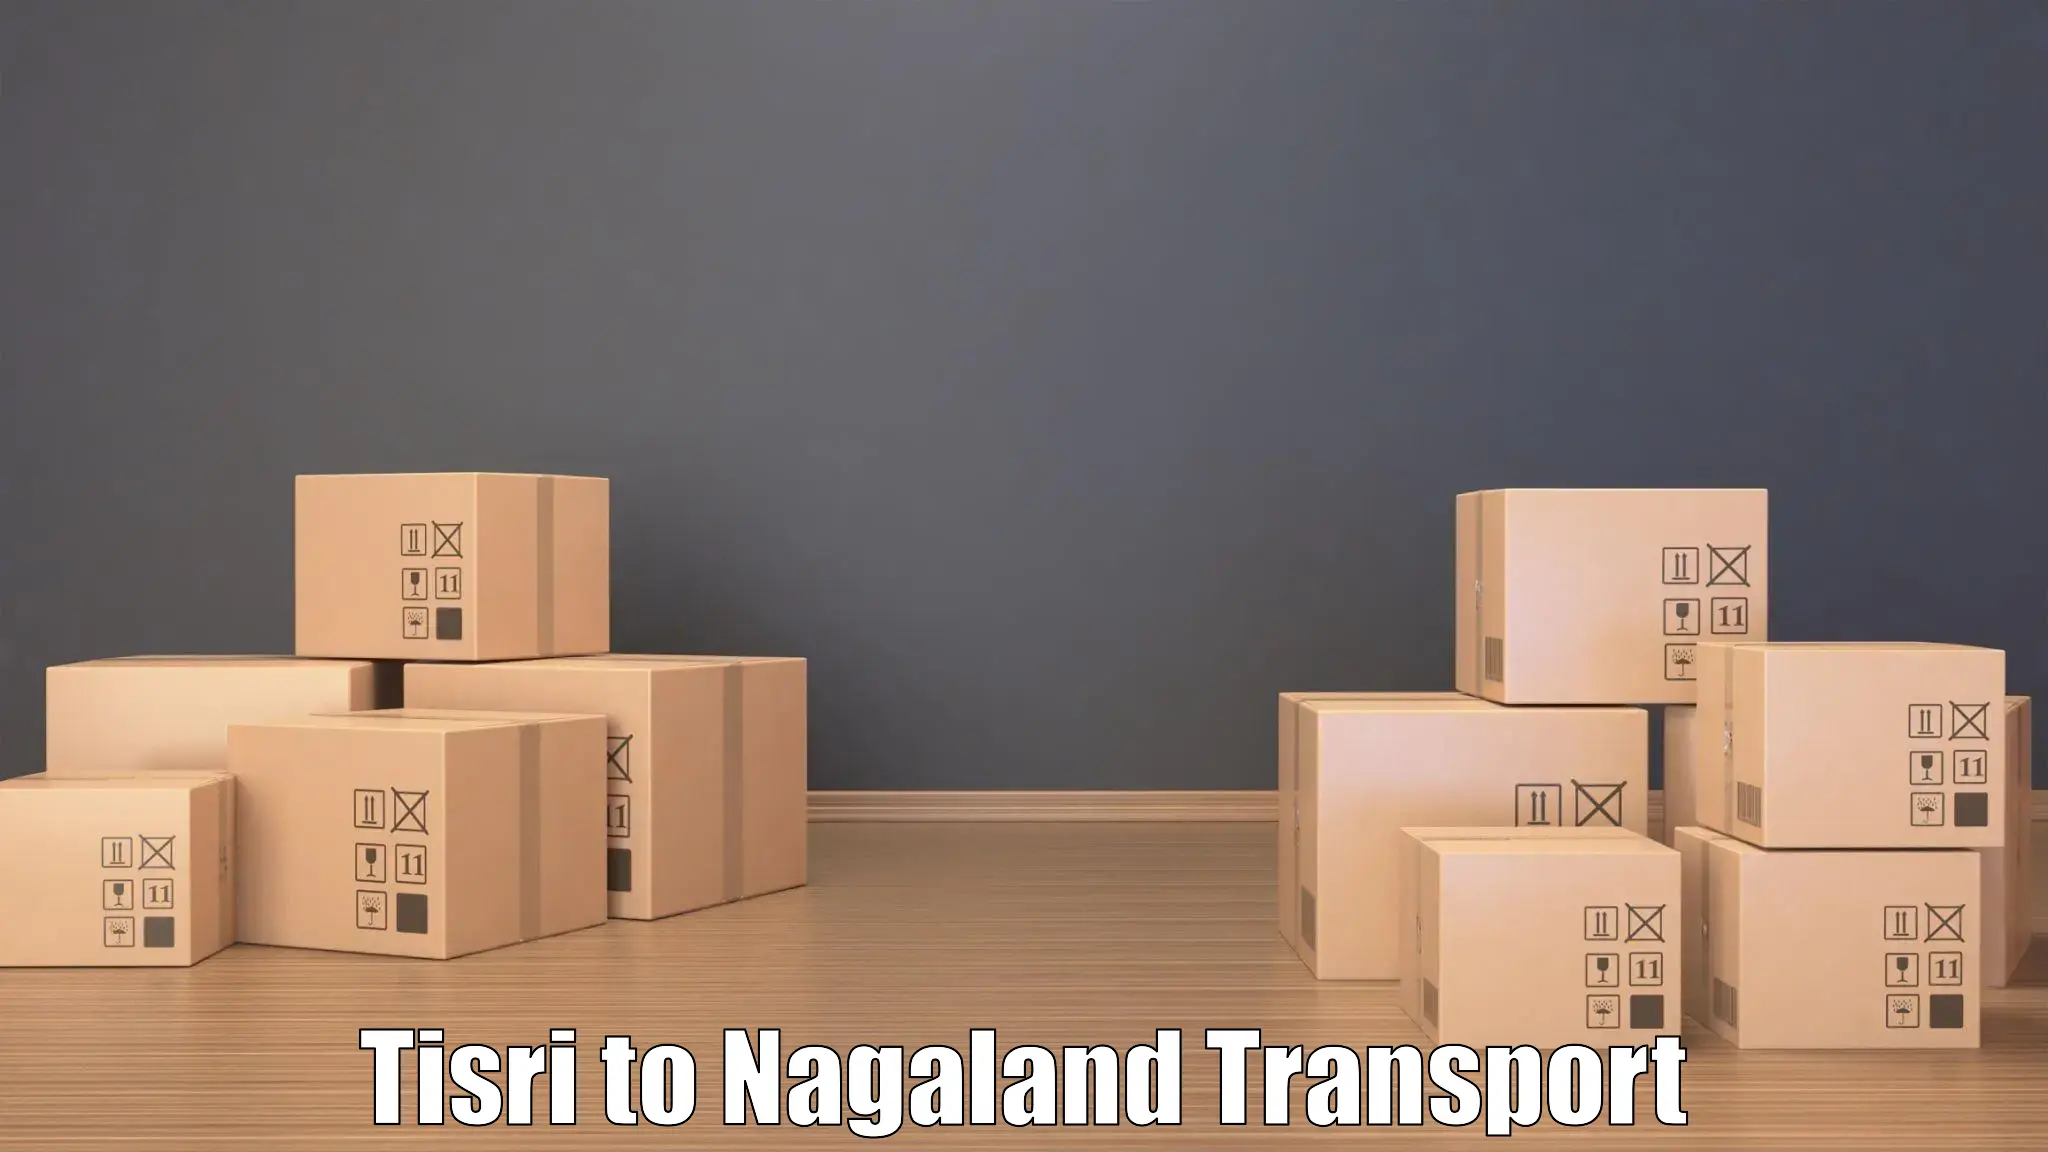 Delivery service Tisri to Nagaland